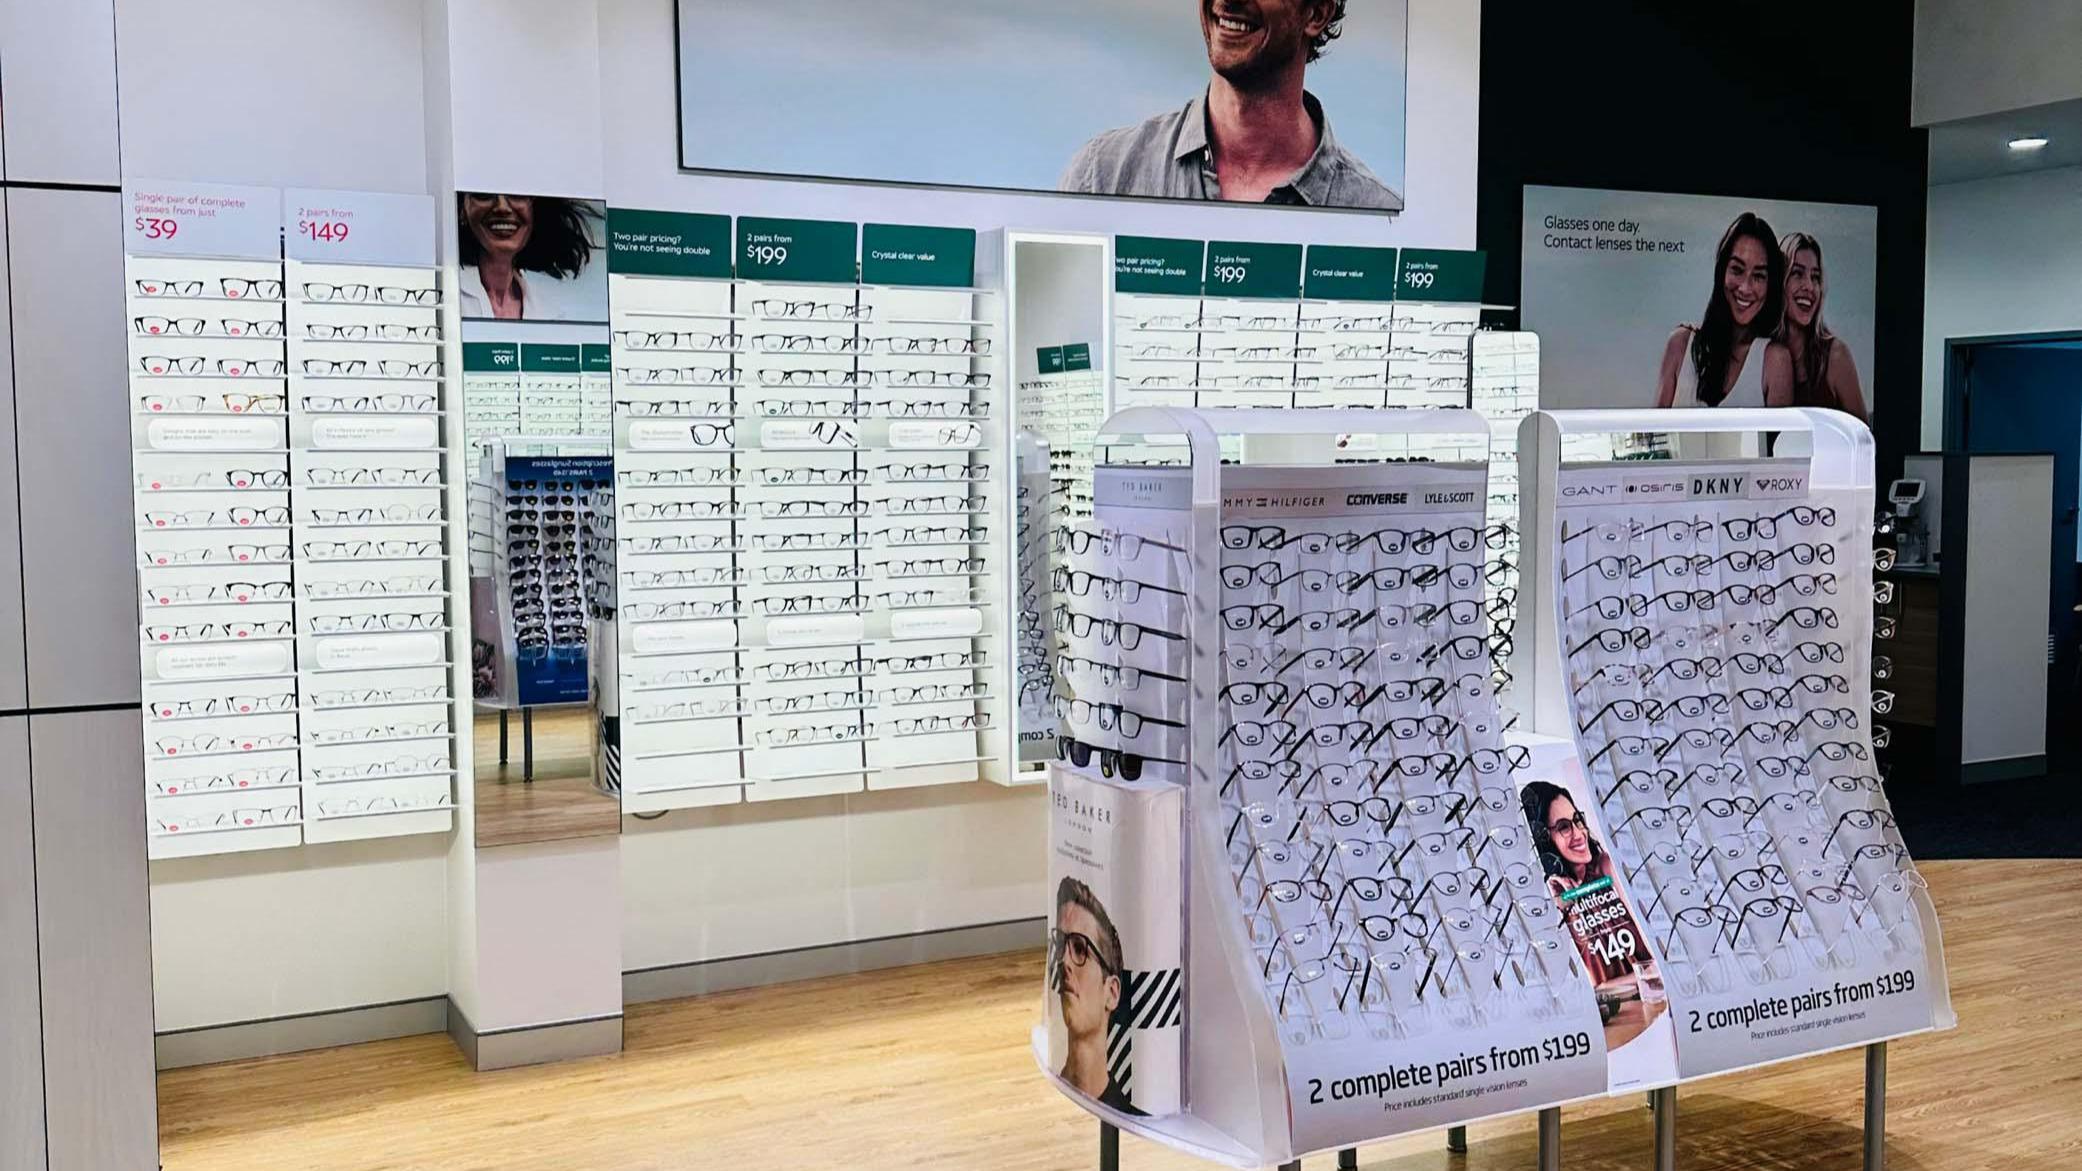 Images Specsavers Optometrists & Audiology - Wanneroo Central